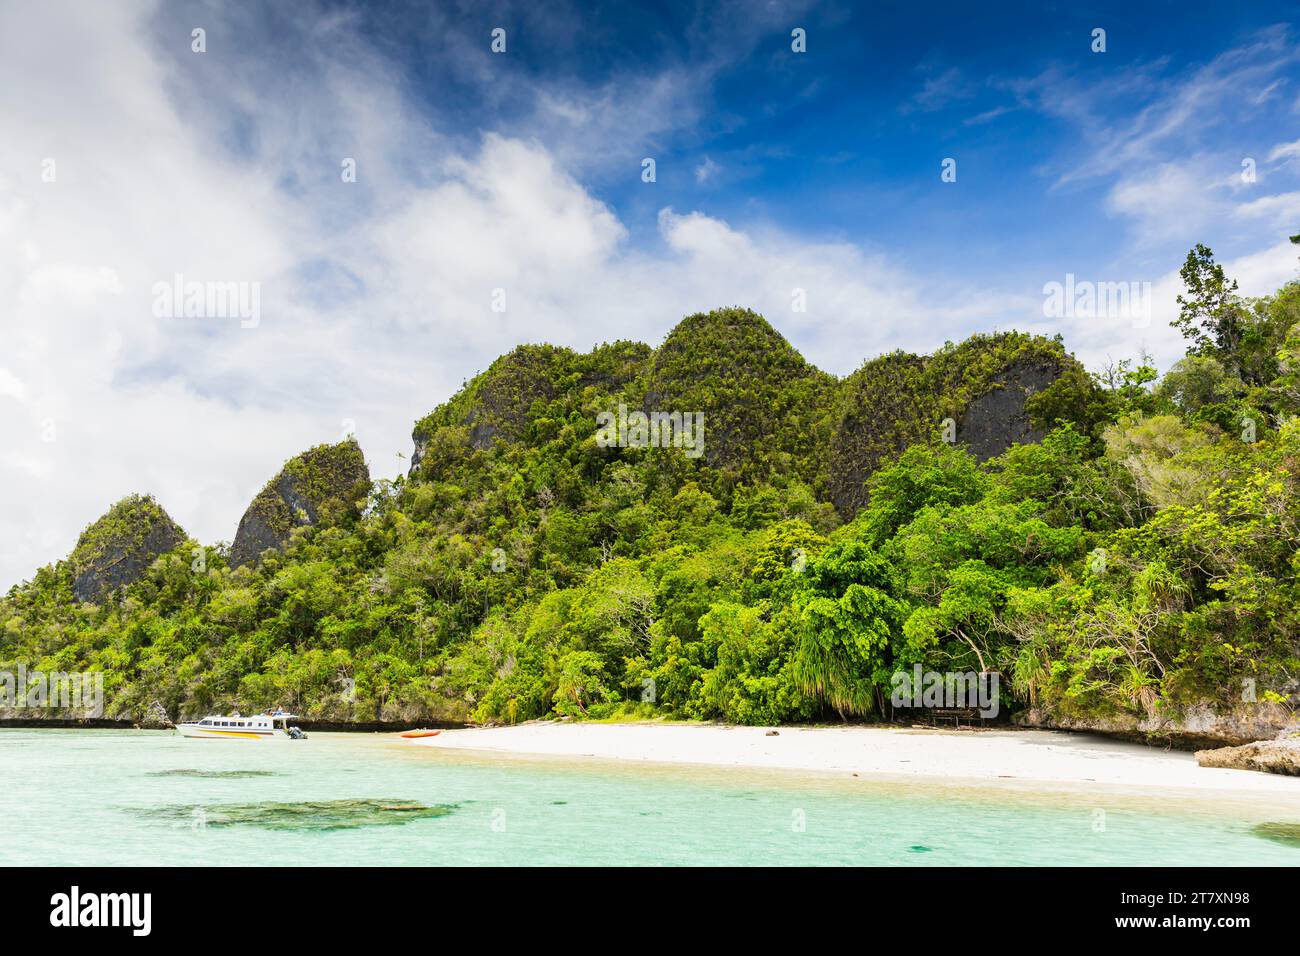 A view of islets covered in vegetation from inside the natural protected harbor in Wayag Bay, Raja Ampat, Indonesia, Southeast Asia, Asia Stock Photo